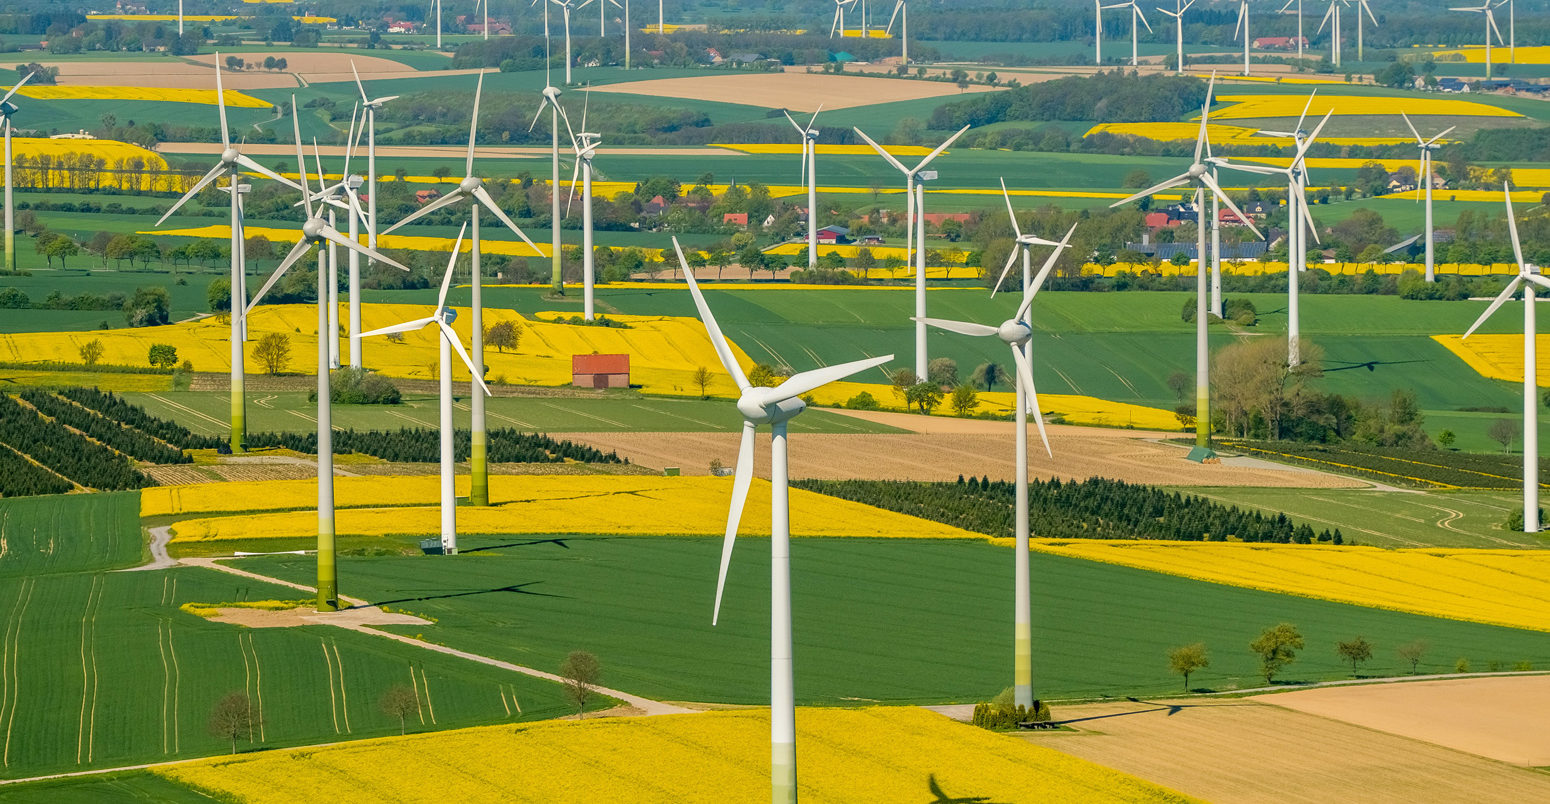 Wind-farm-and-rapeseed-fields-on-the-town-borders-between-Warstein-Belecke-and-Anrochte-Erwitte,-Germany